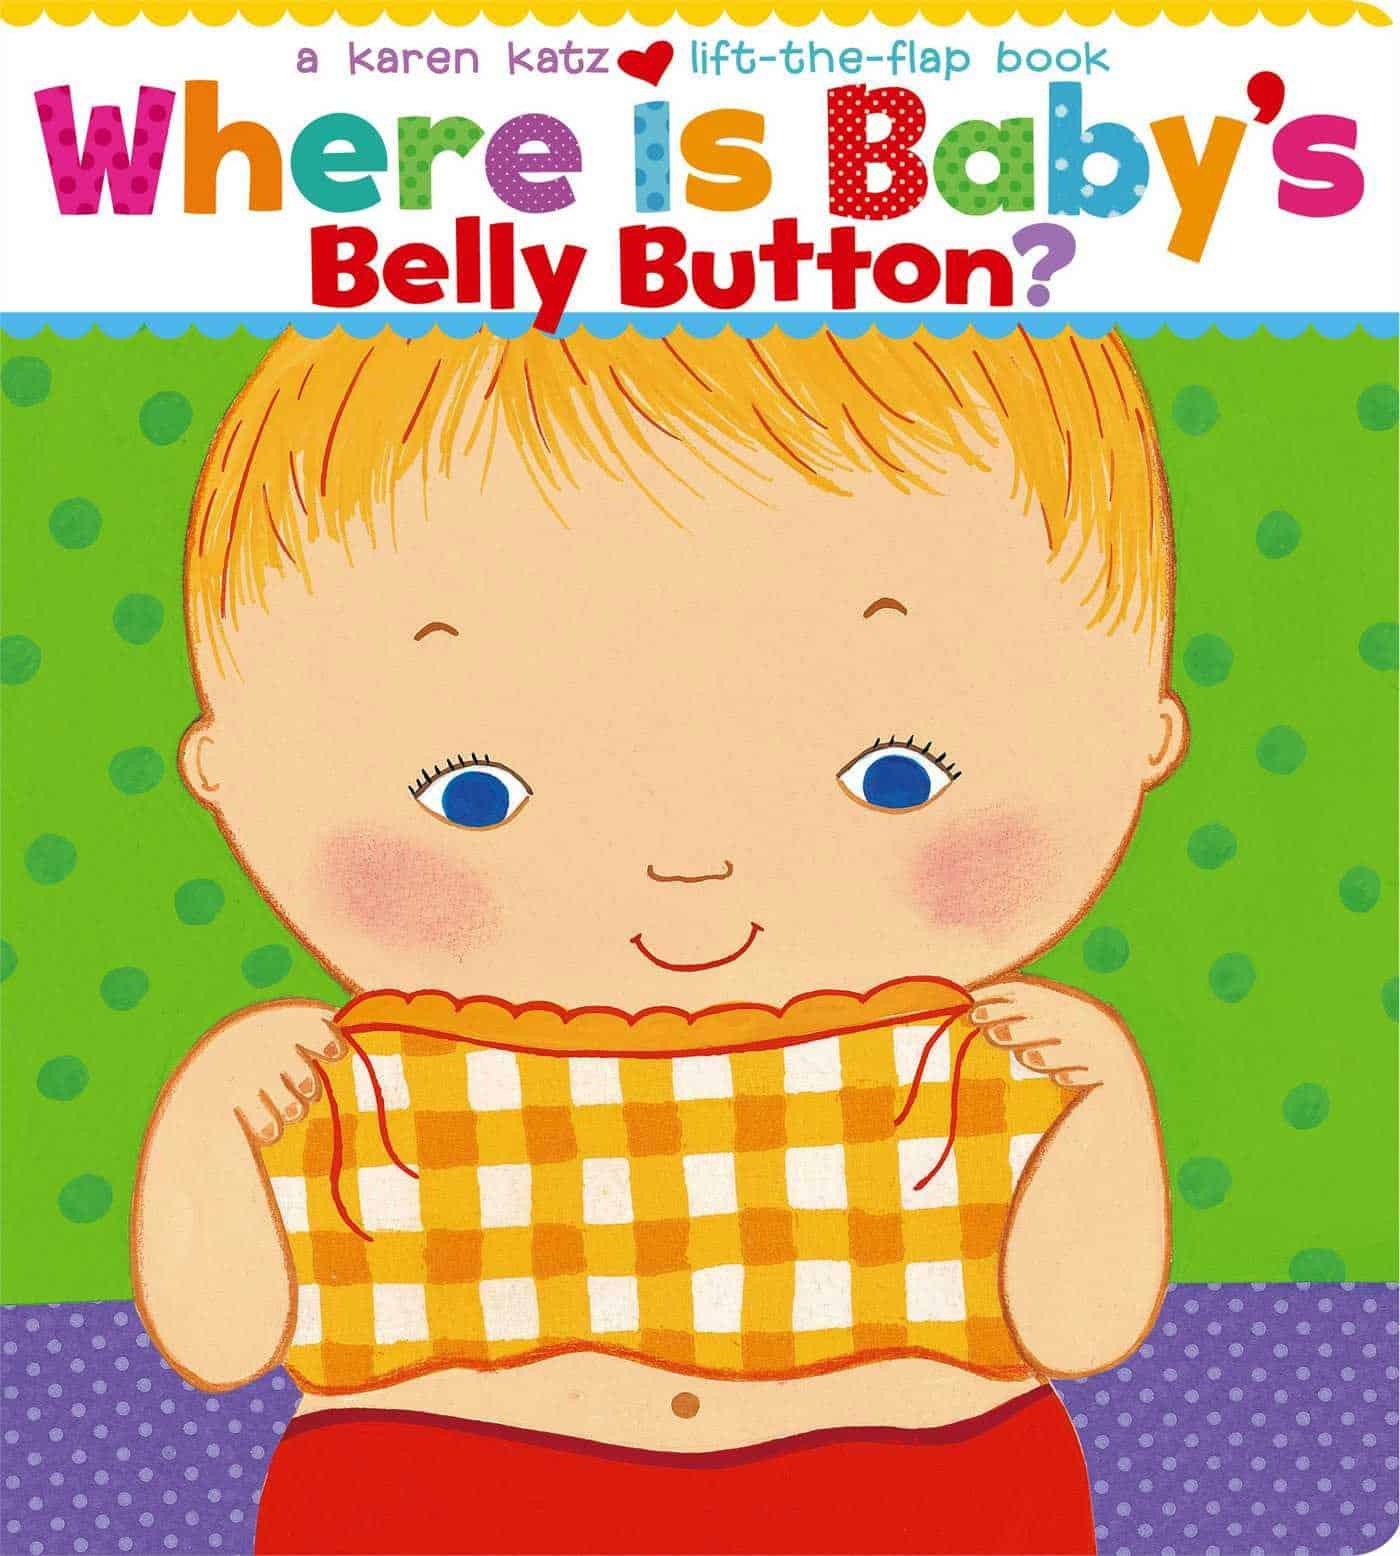 Where is Baby's Belly Button: A Lift-the-flap Book by Karen Katz